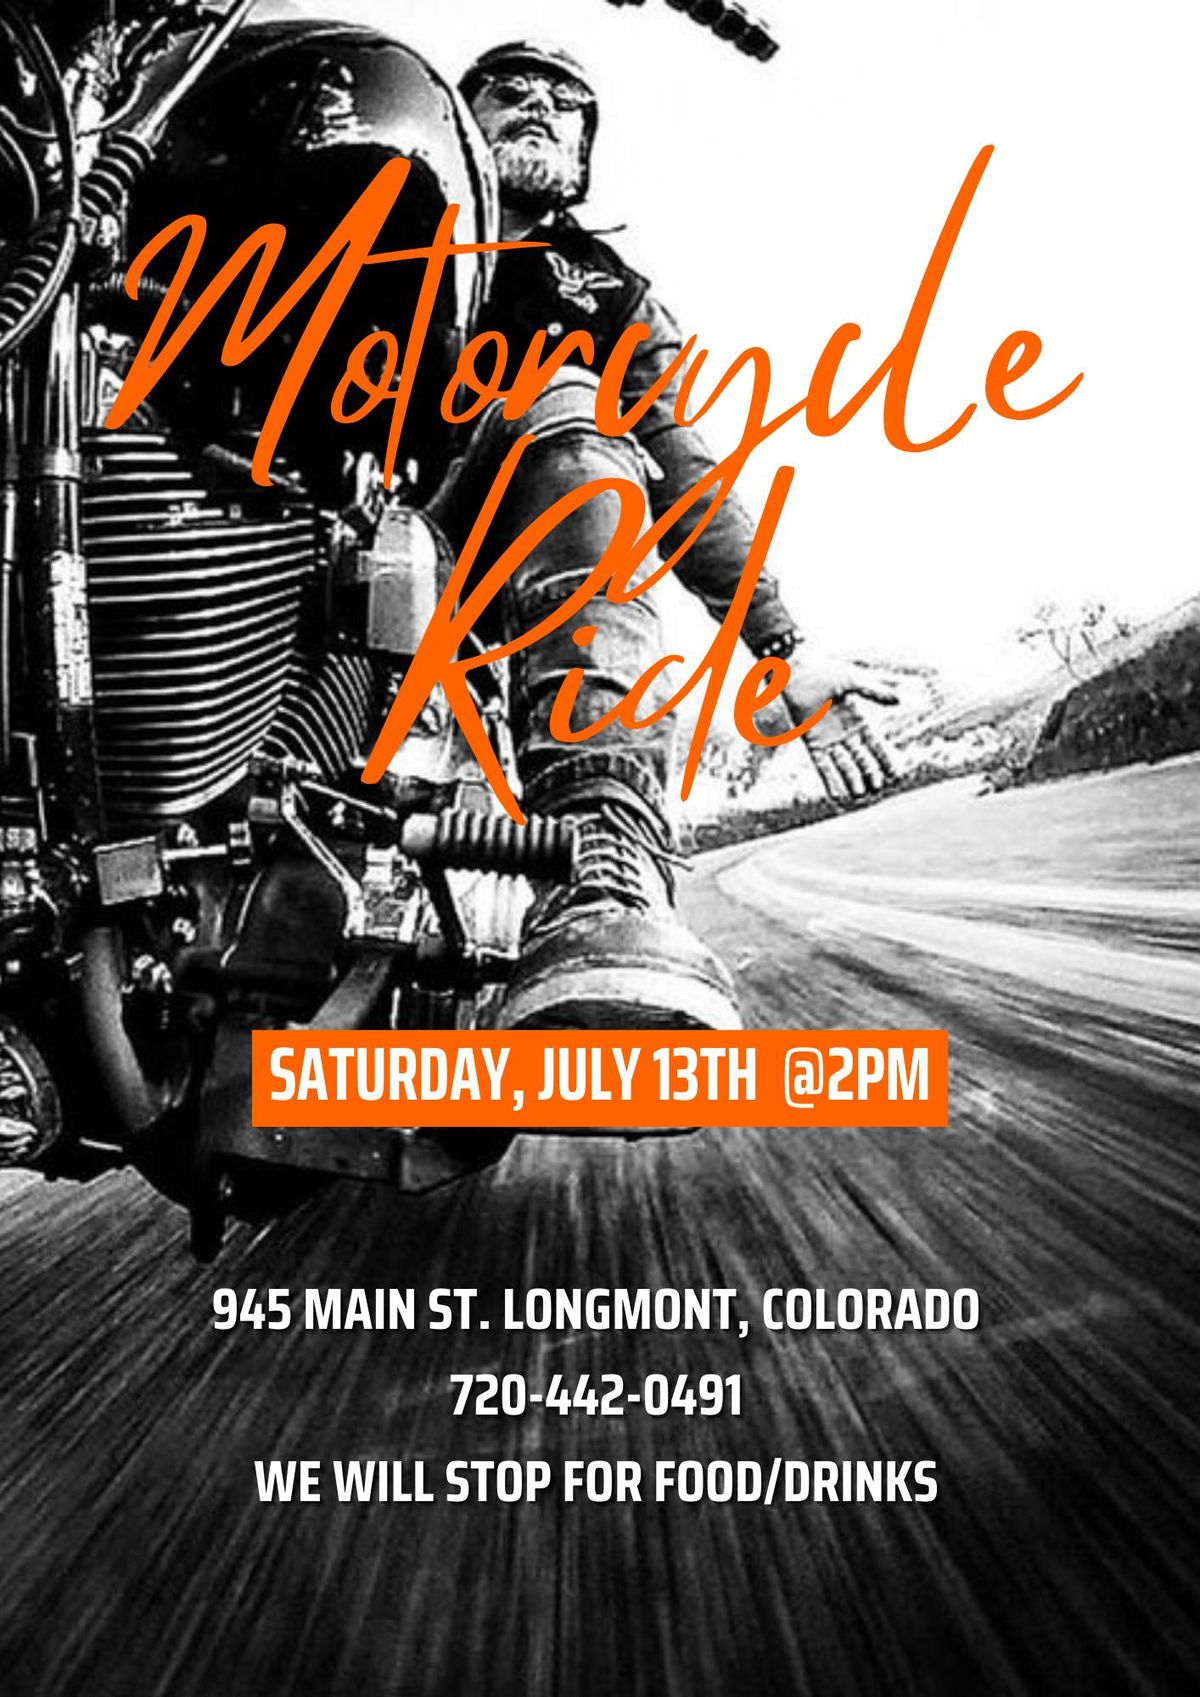 2nd Saturday Motorcycle Ride